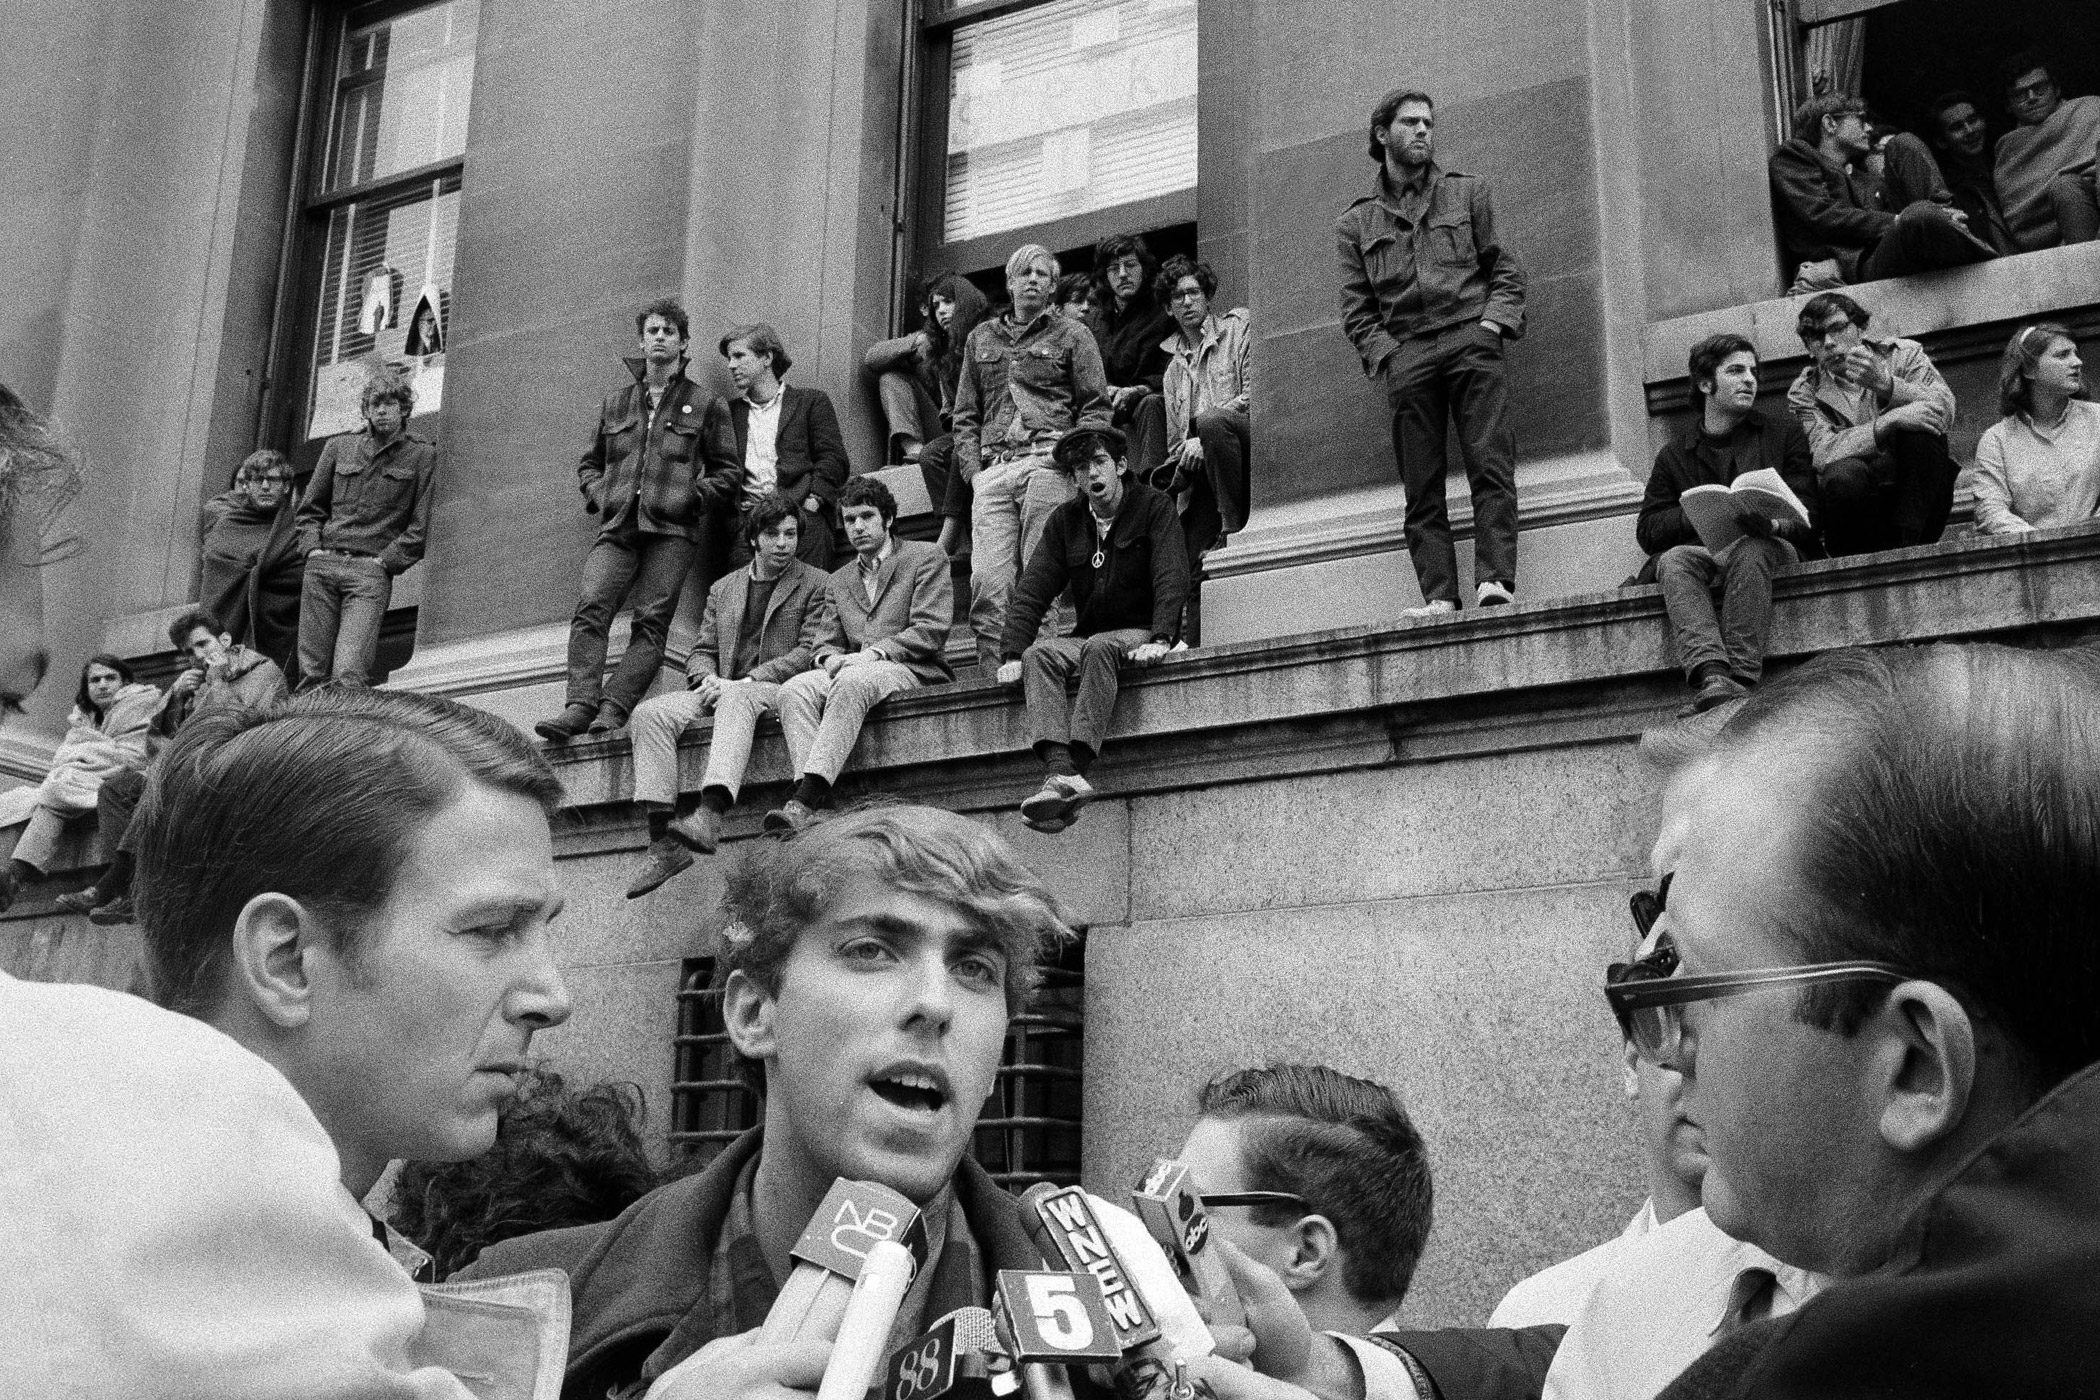 Mark Rudd, a leader of the student protest at Columbia University in New York, speaks to reporters as fellow students, rear, occupy the Low Memorial Library on April 25, 1968. Standing on ledge, center, with hands in pockets, is Juan Gonzalez, another of the student leaders. The 1968 Columbia University Protests targeted a variety of issues, most notably the Vietnam War.